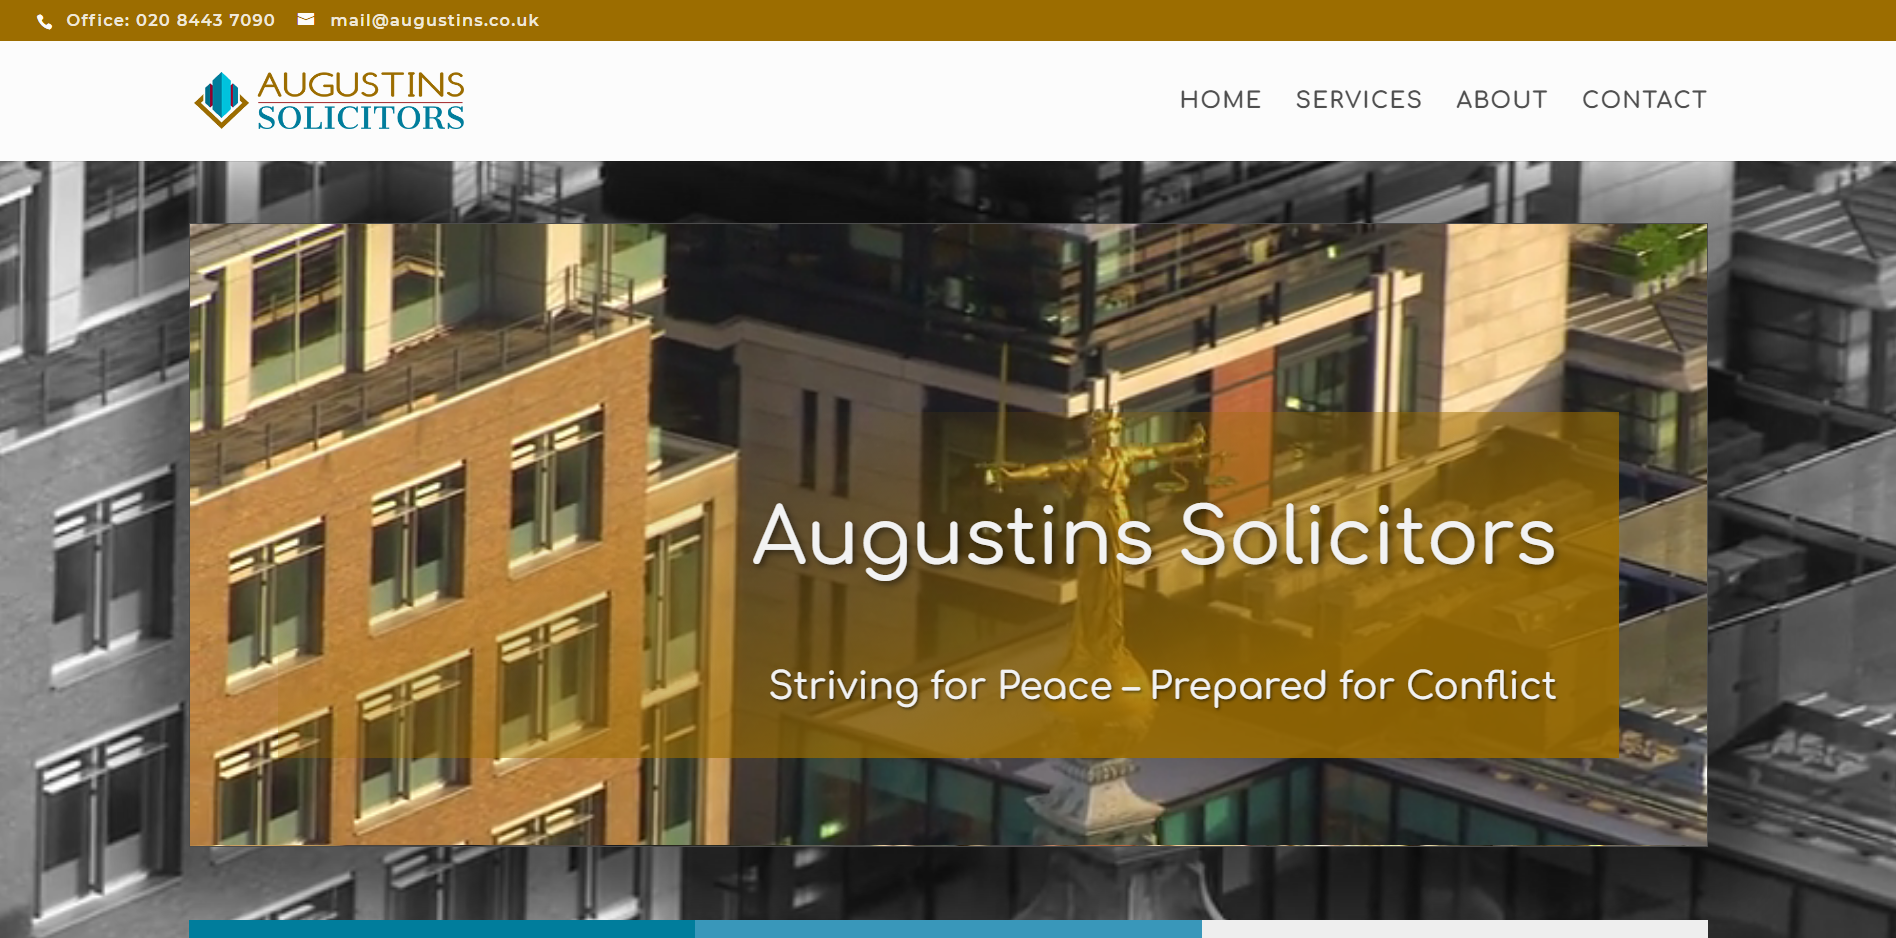 Agustins Solicitors